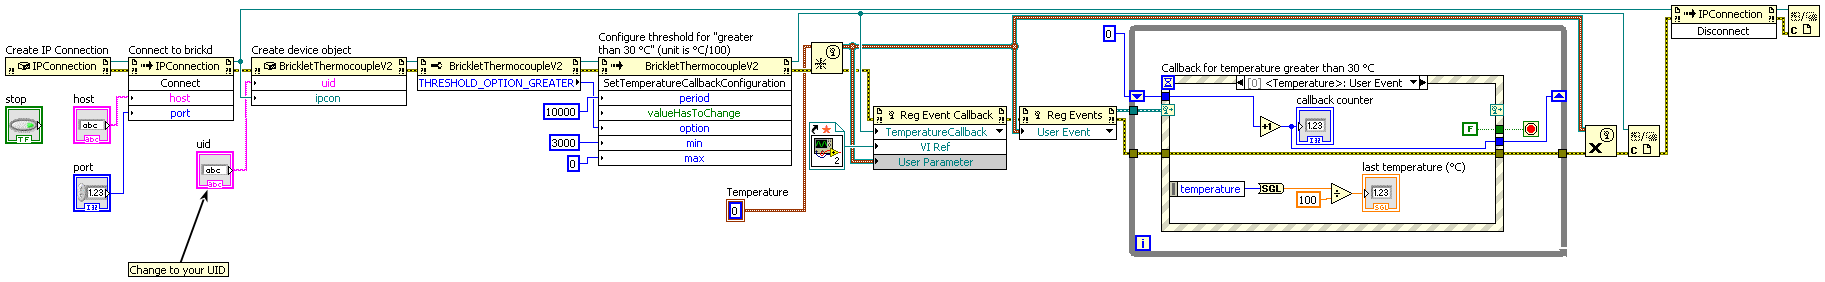 LabVIEW Threshold Example